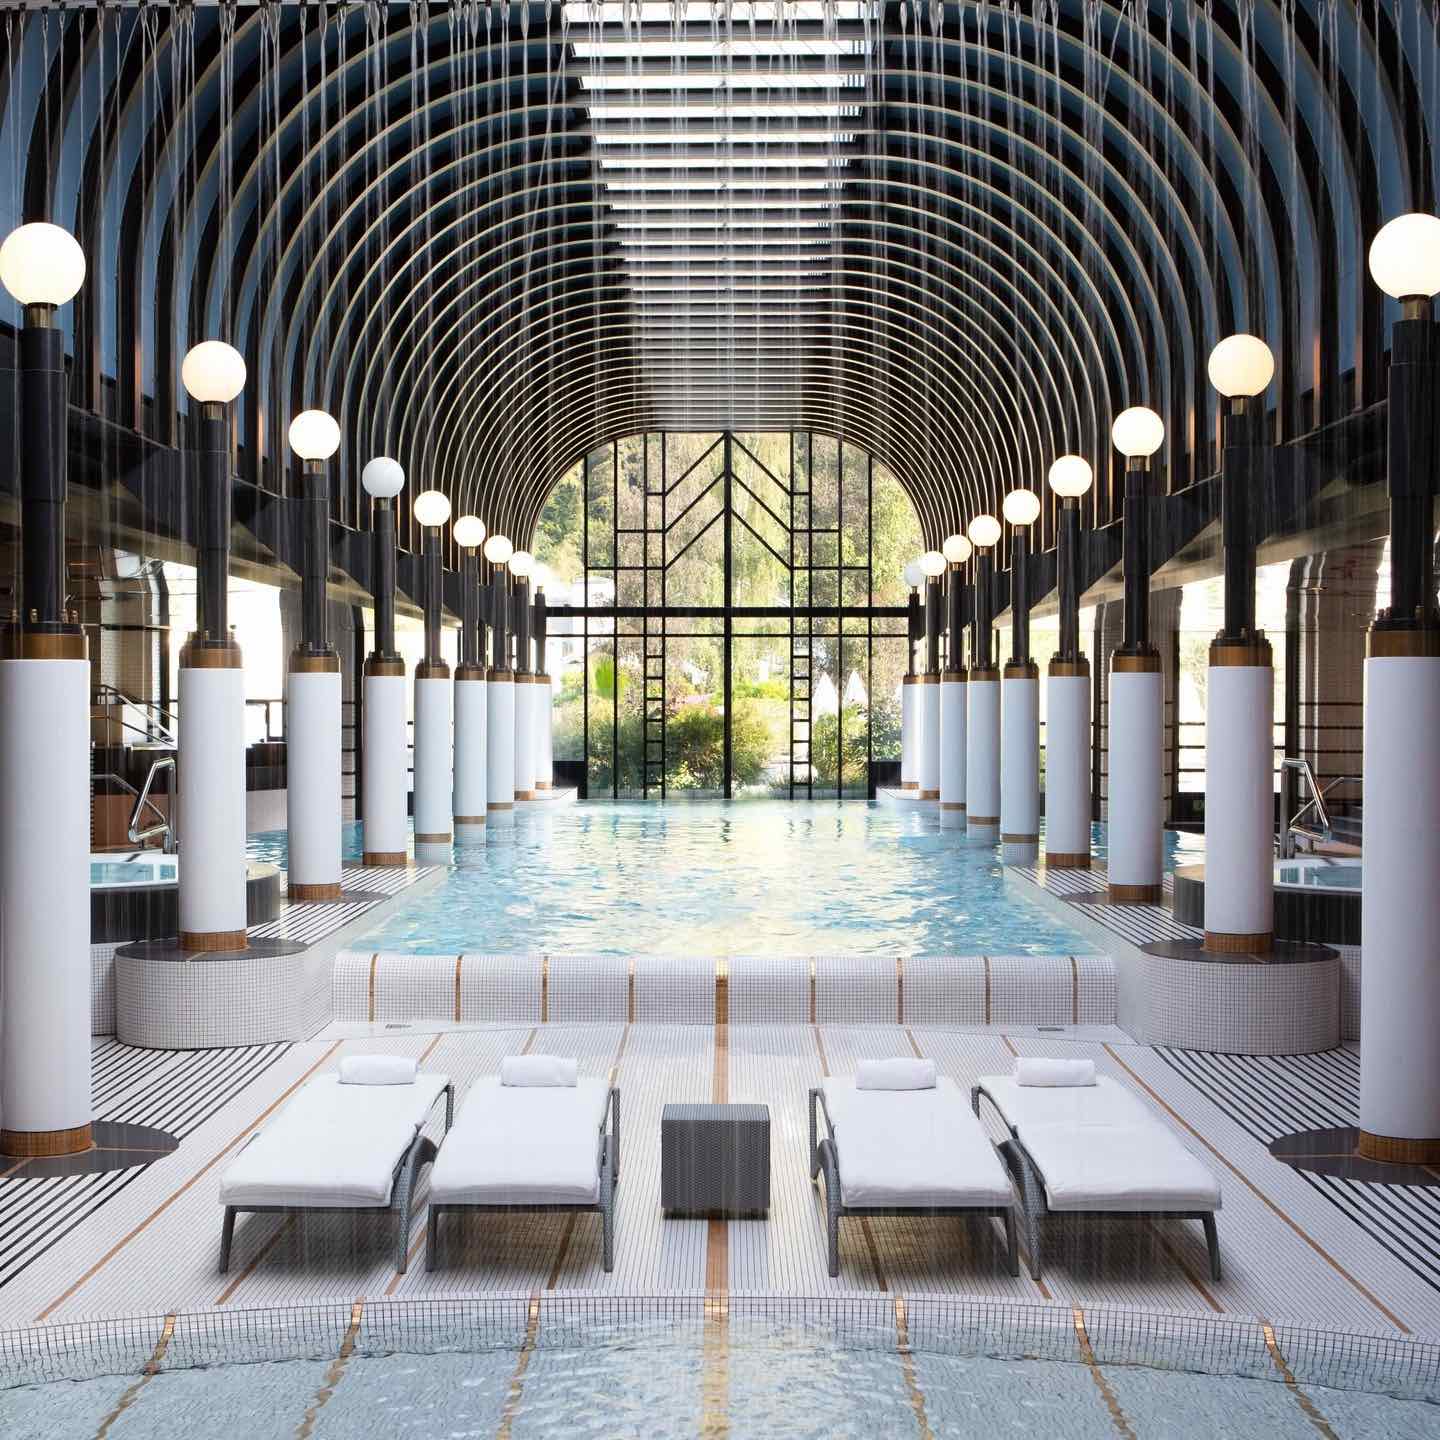 Interior of Spa with swimming pool at Victoria-Jungfrau Grand Hotel & Spa